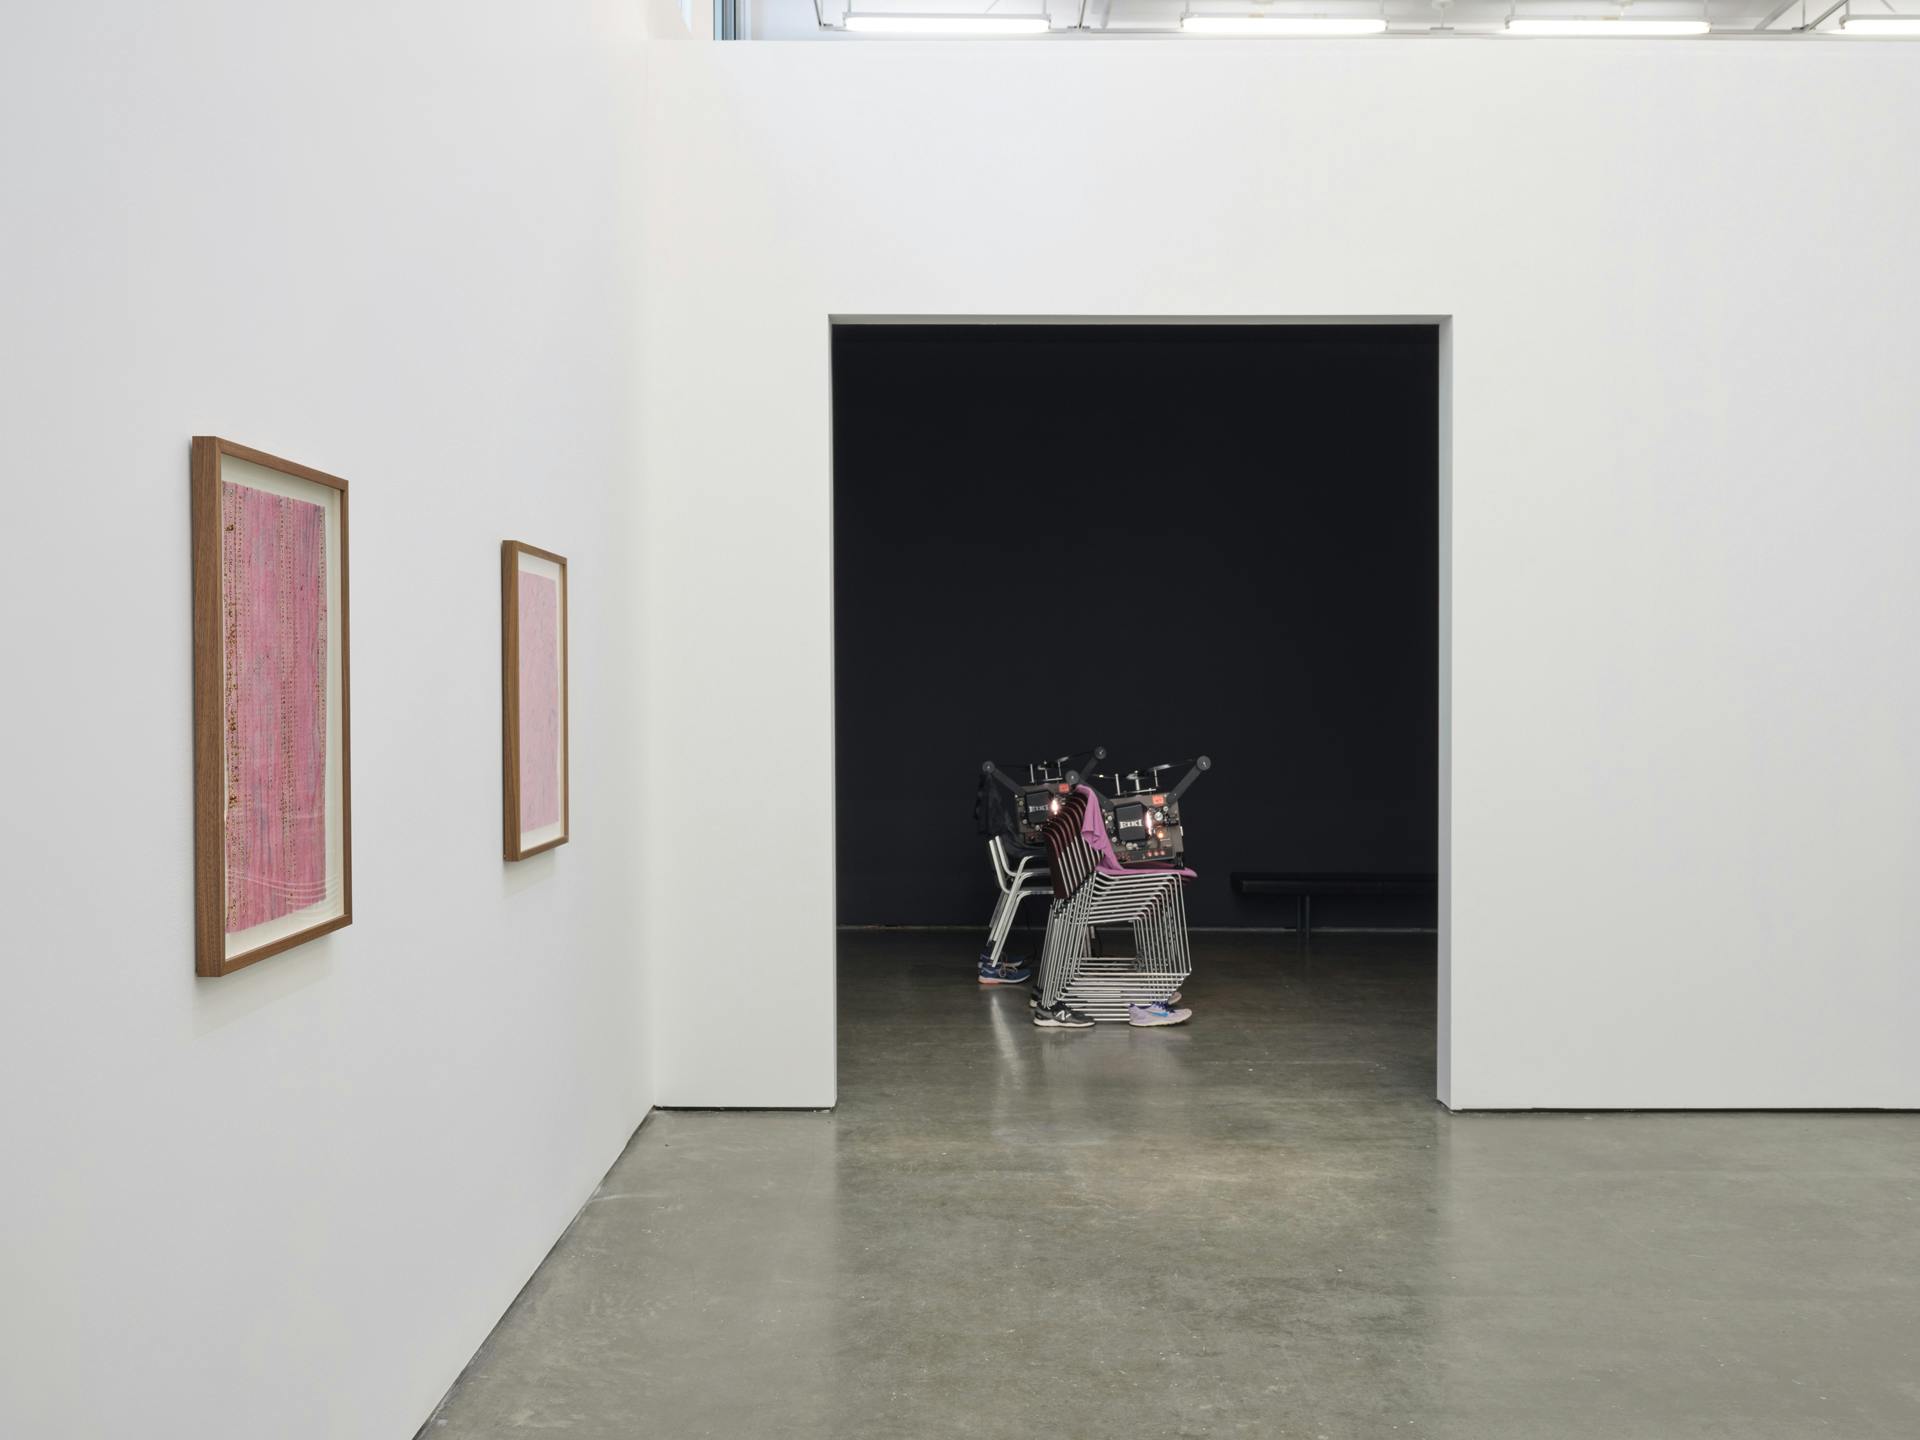 Two framed pink collages on a white wall perpendicular to a doorway leading into a dark room with a sculpture made of stacked chairs supporting a film projector visible.